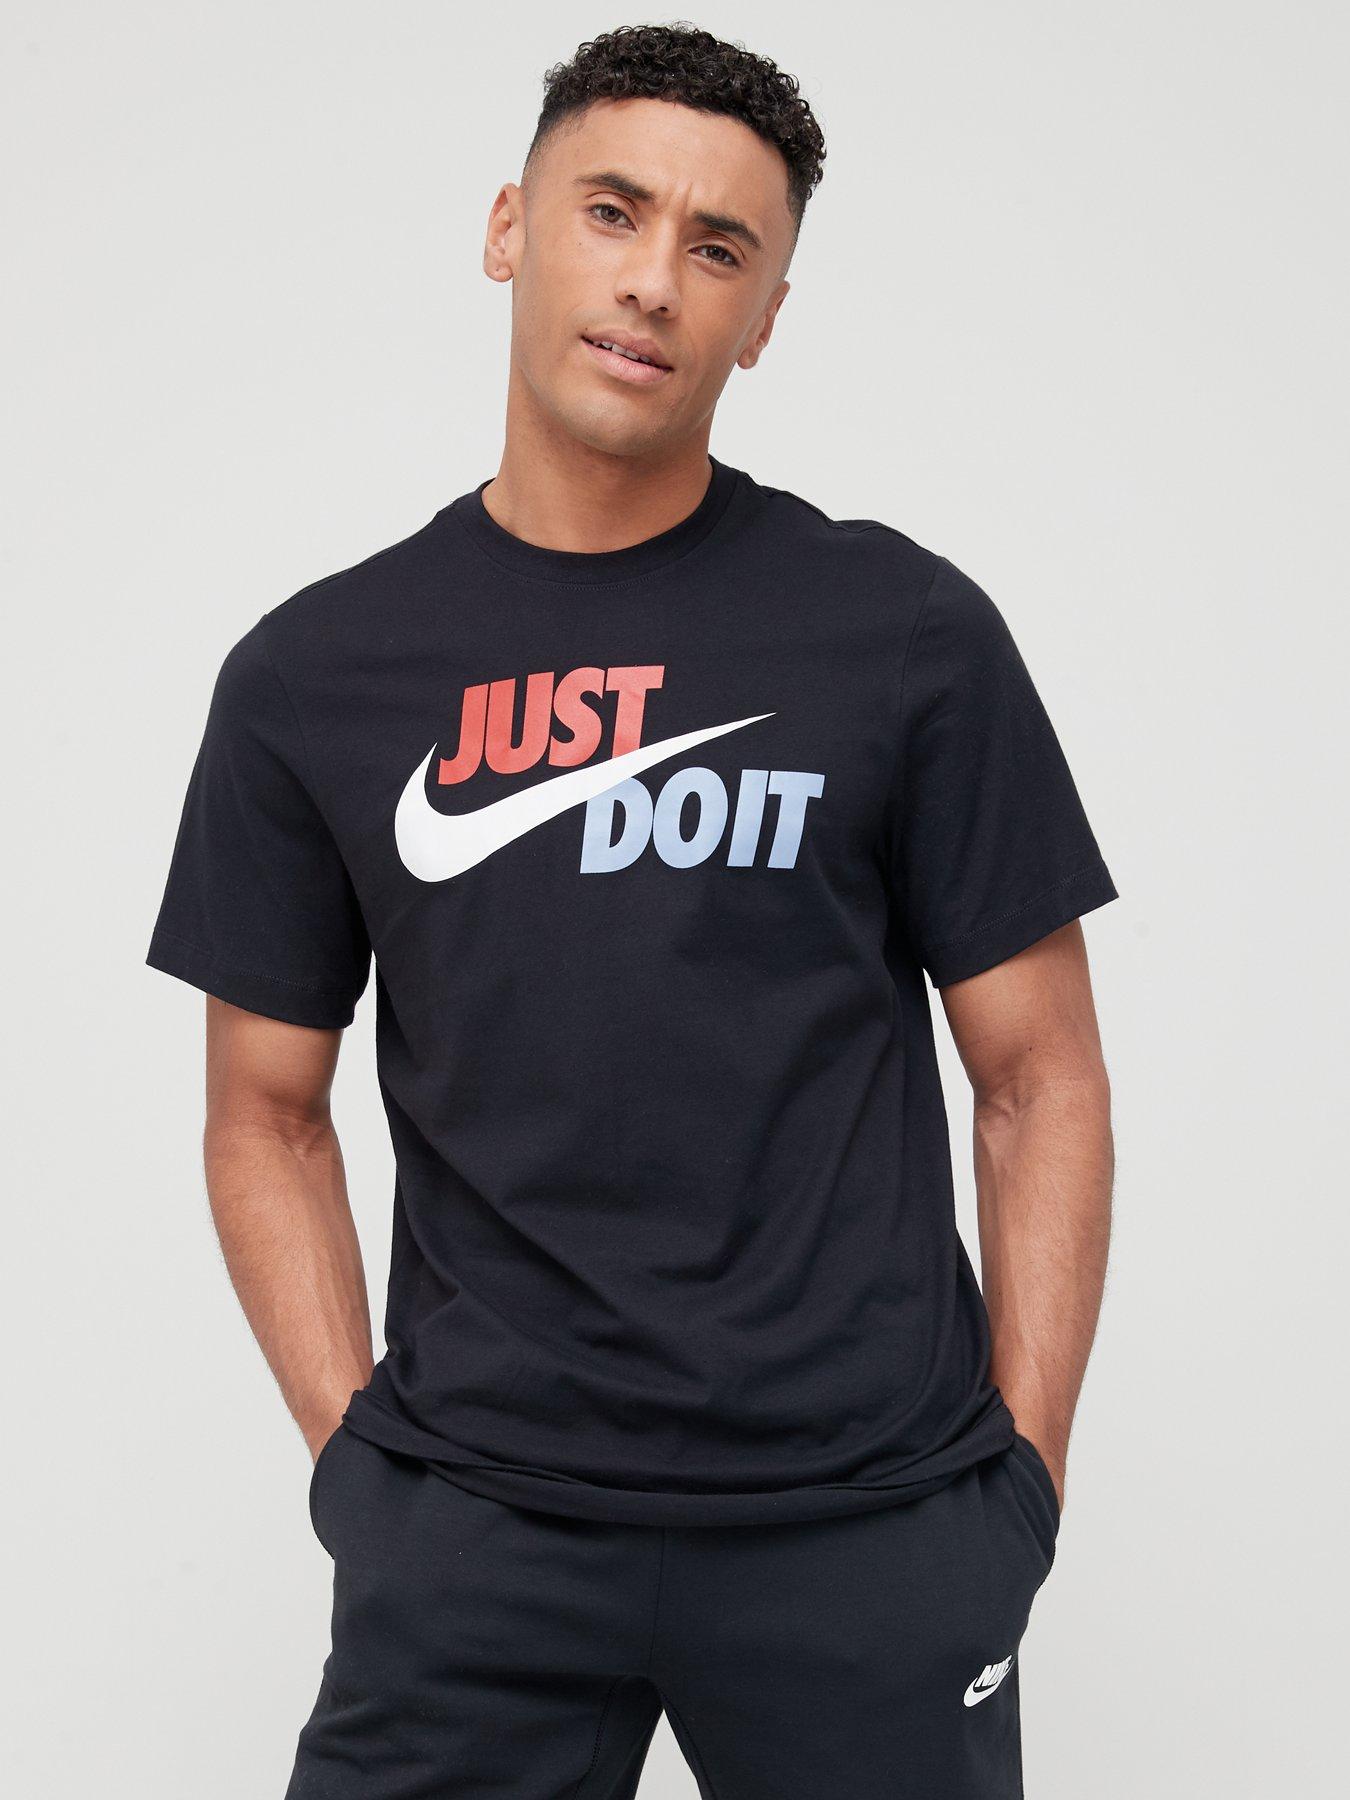 how much does it cost nike to make a shirt